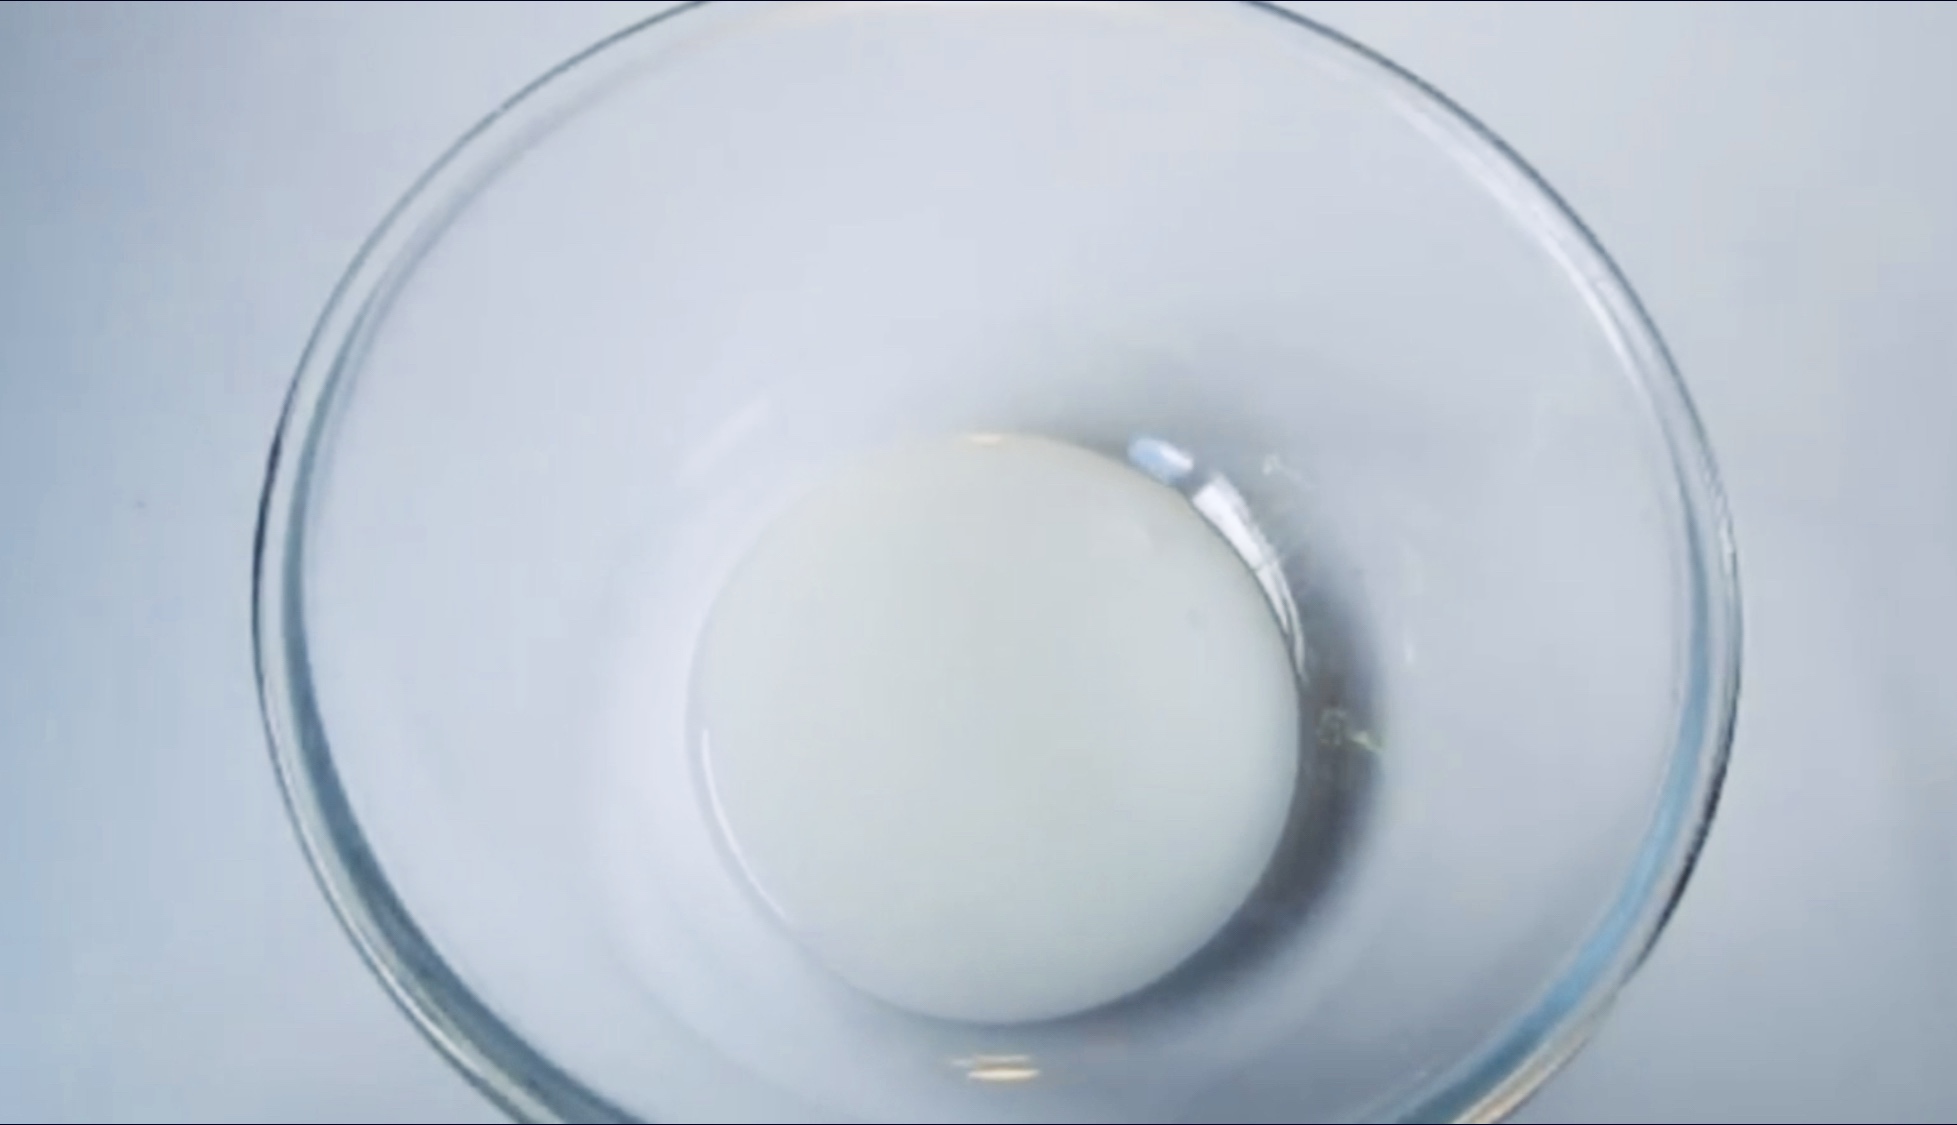 pour glue, hand moisturizer, baking soda and contact lens solution into a bowl and stir